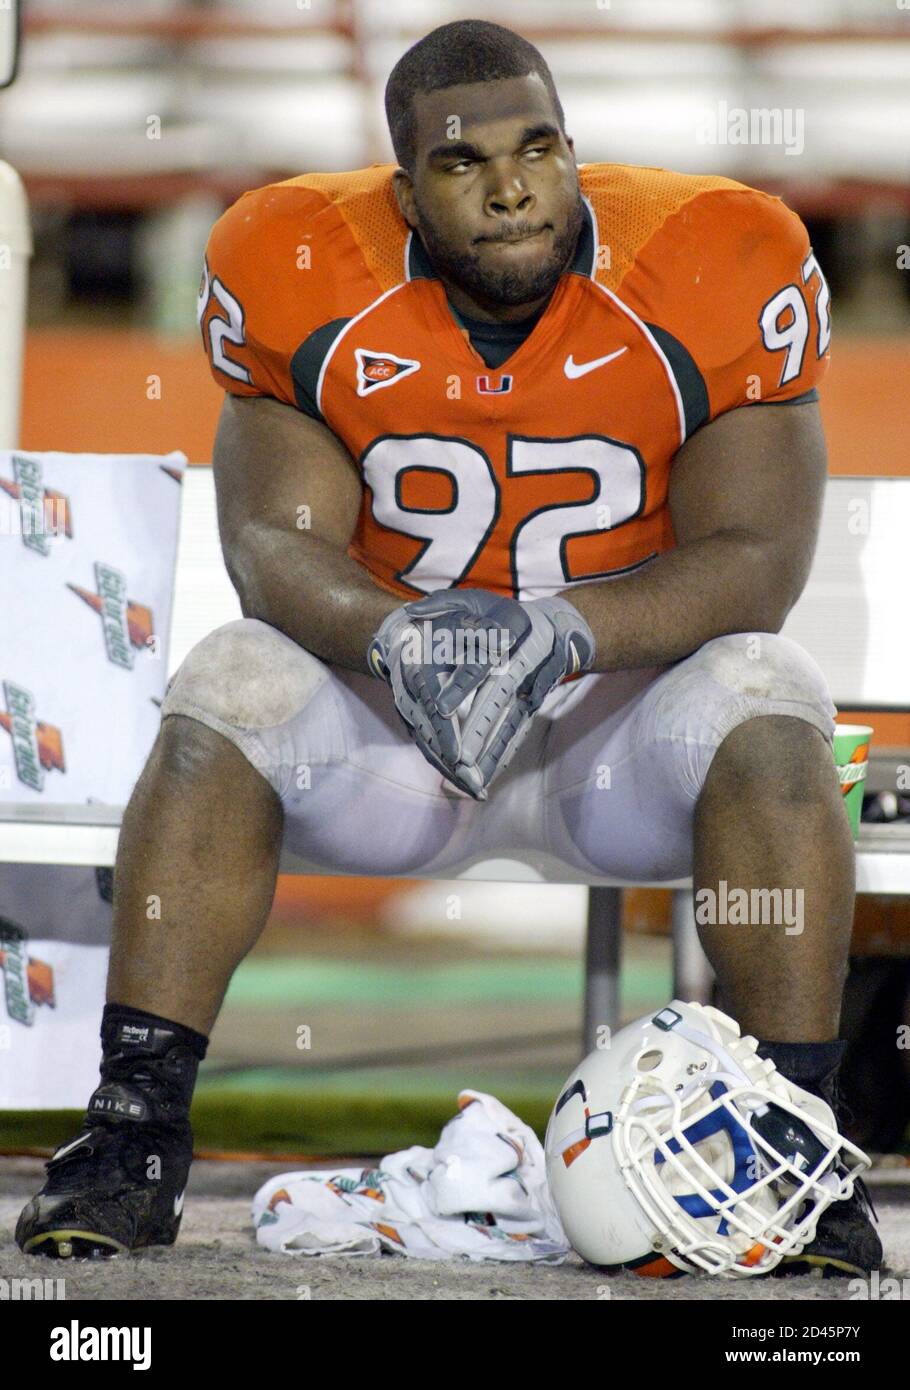 University of Miami Hurricanes' Orien Harris sits on the bench dejected  after an upset loss to the Clemson Tigers, at the Orange Bowl in Miami,  Florida, November 6, 2004. The Tigers defeated